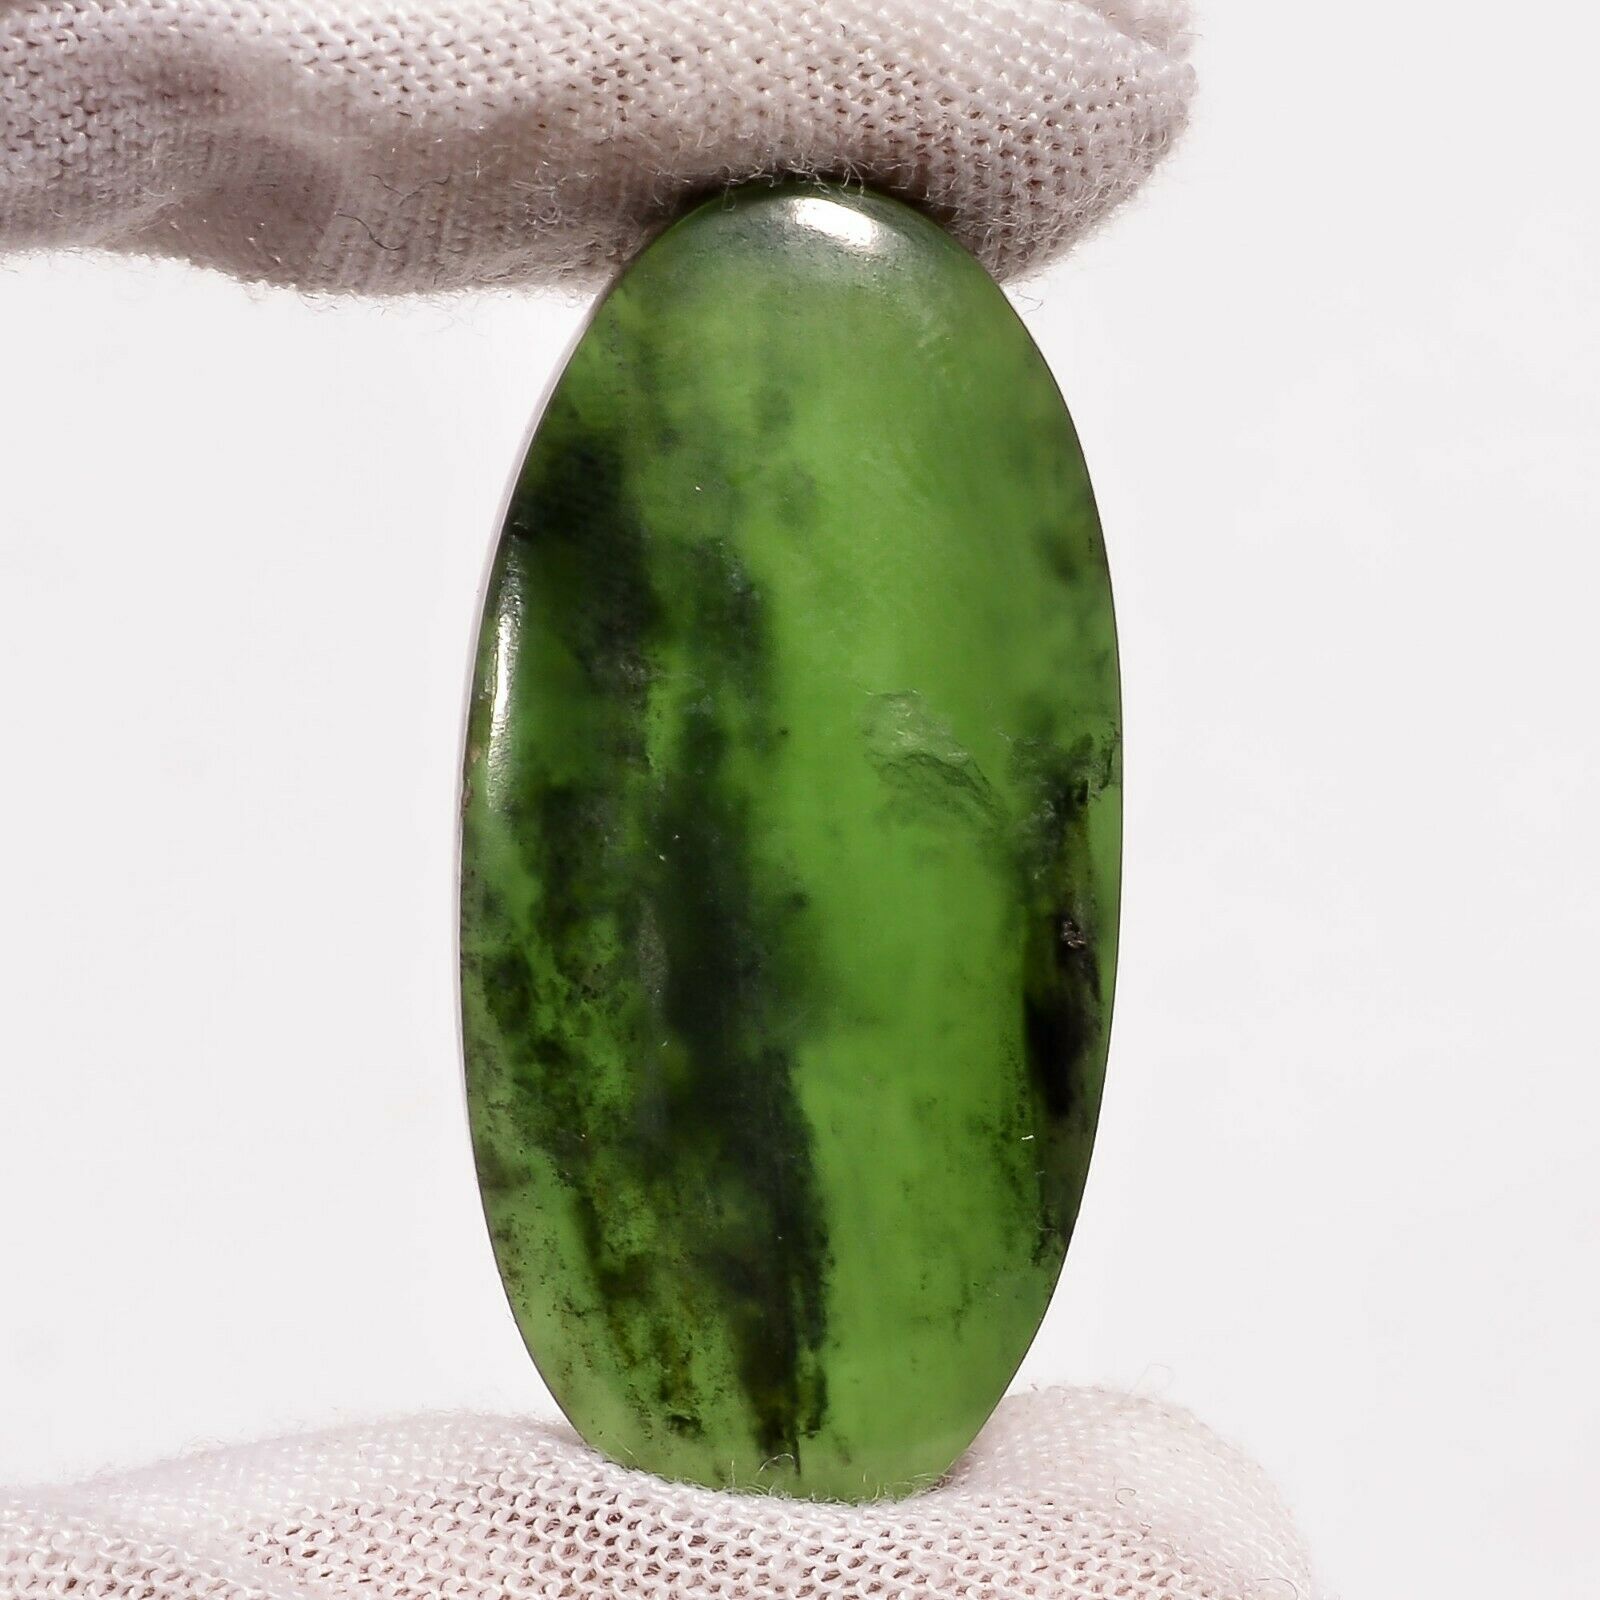 35 Ct. Natural Nephrite Jade Oval Cabochon Loose Gemstone For Jewelry Yy-849